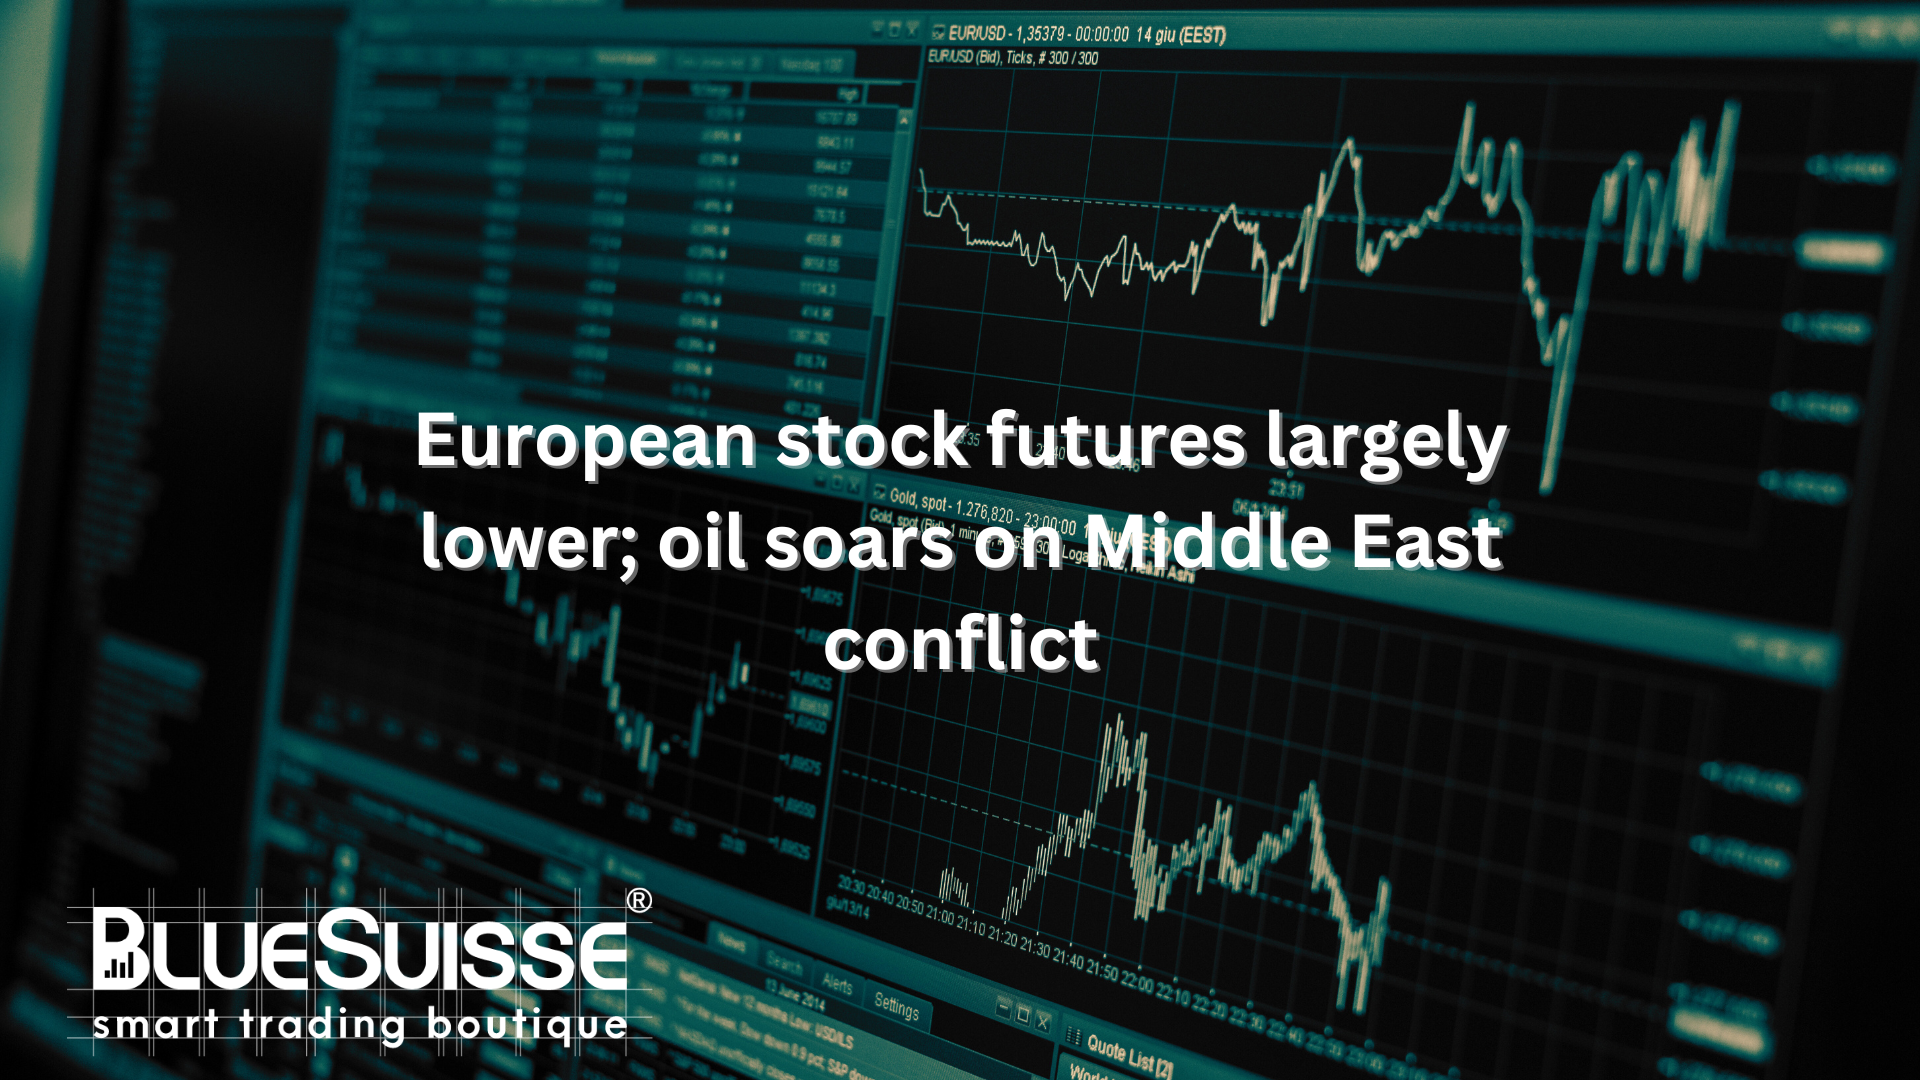 European stock futures largely lower; oil soars on Middle East conflict